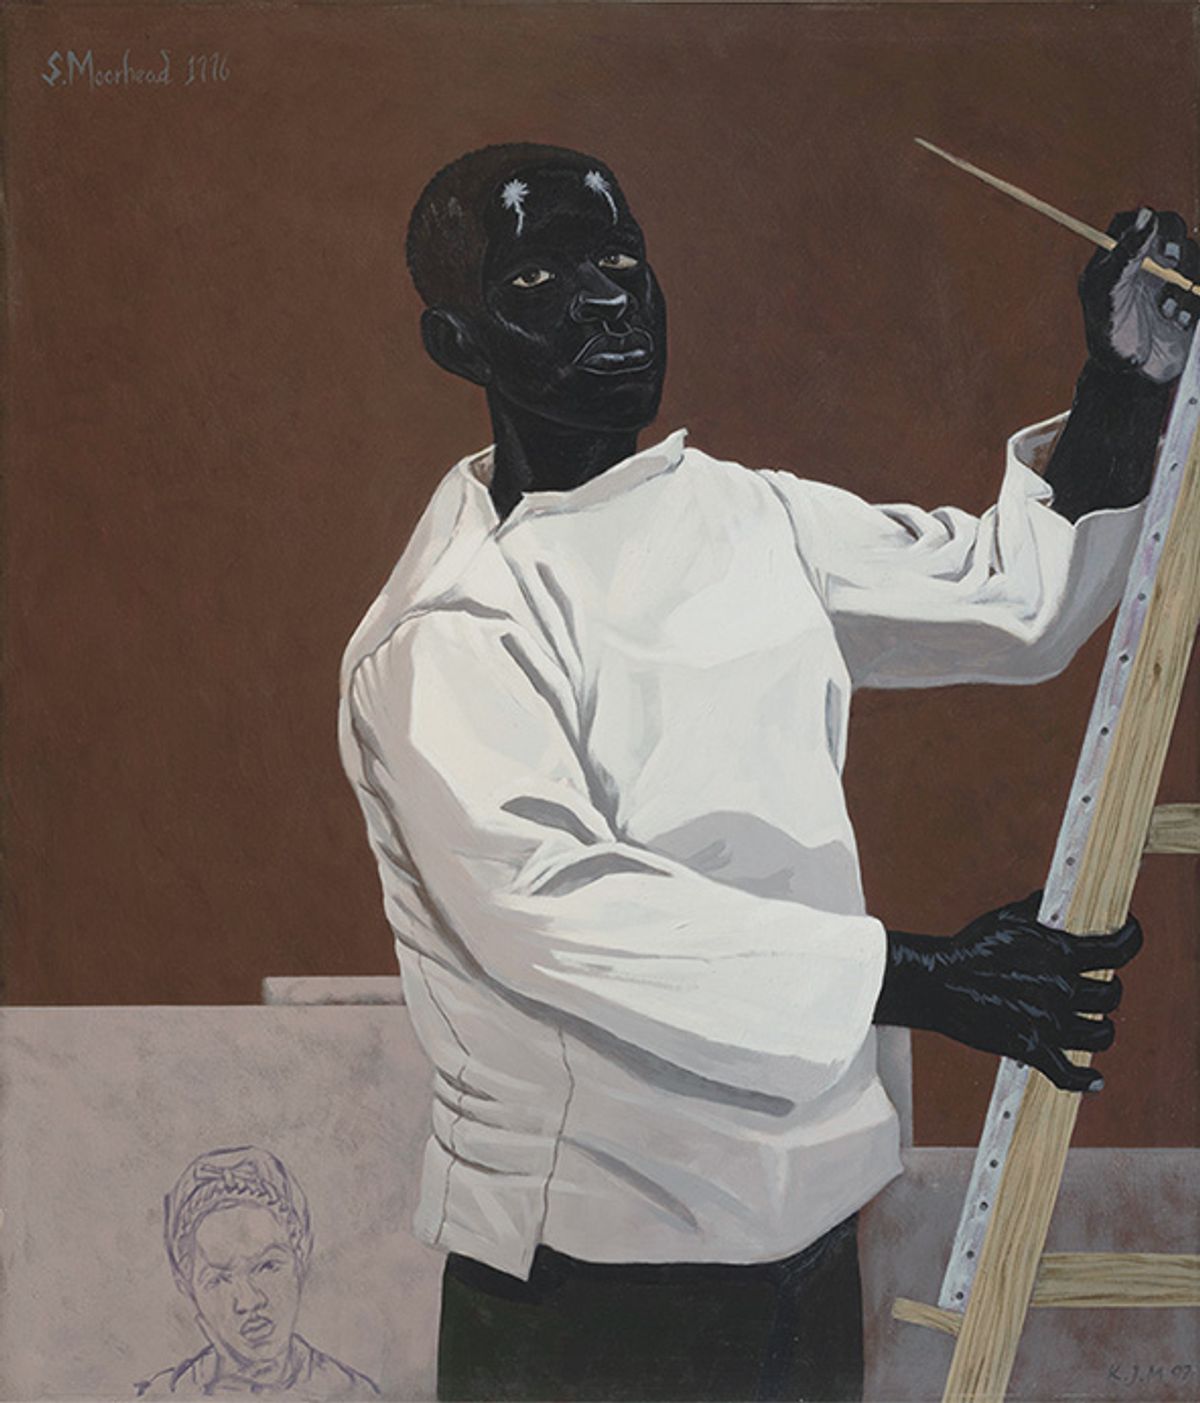 Kerry James Marshall’s Scipio Moorhead, Portrait of Himself, 1776 (2007) is a tribute to the enslaved African American artist whose work has not survived
Photo: James Prinz Photography; © Kerry James Marshall; courtesy of the artist and Jack Shainman Gallery, New York